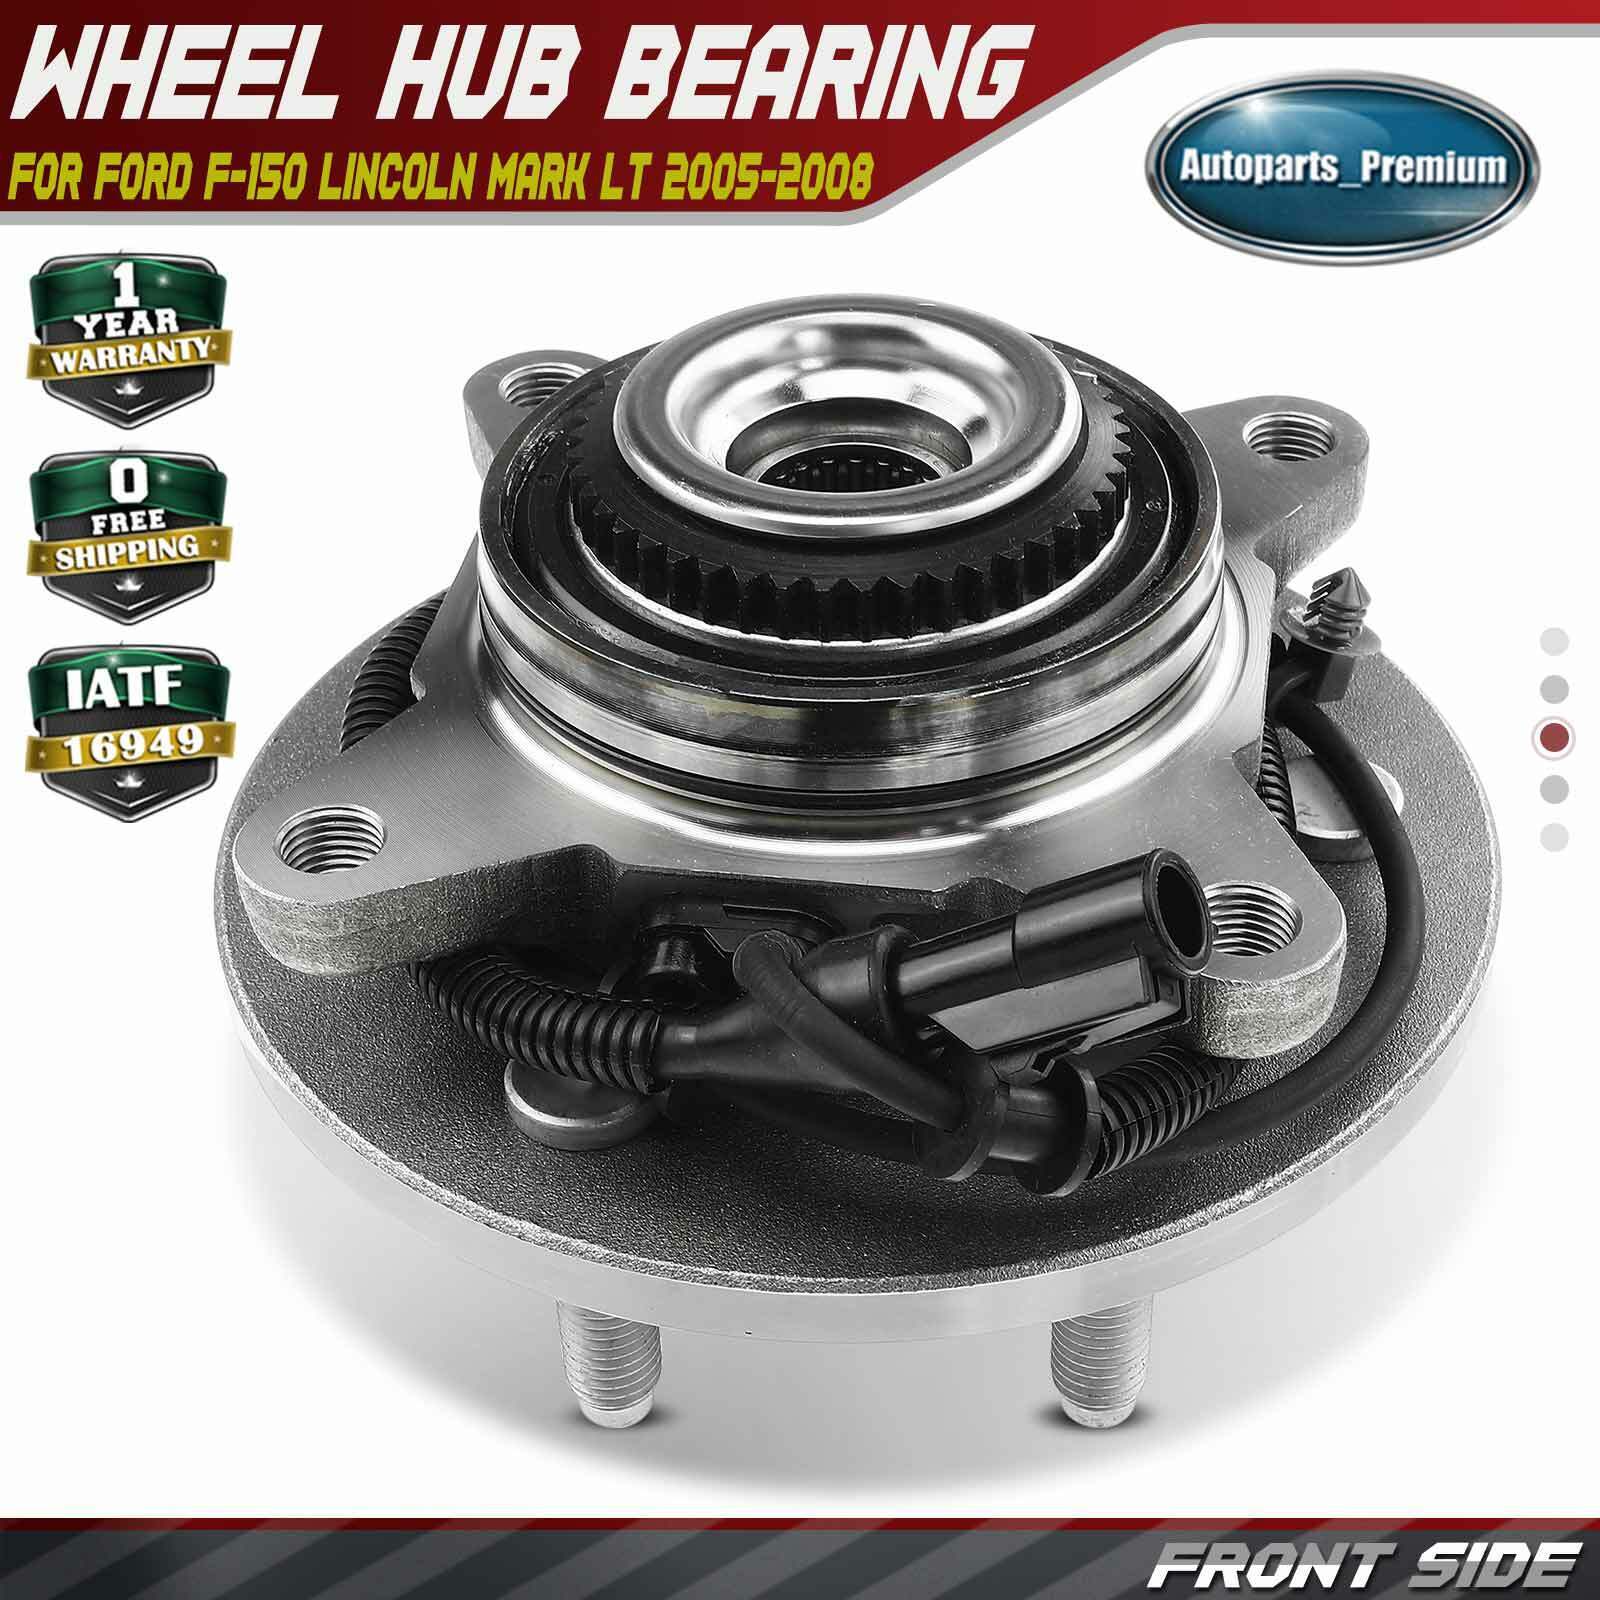 Front L/R Wheel Hub Bearing Assembly w/ ABS for Ford F-150 Lincoln Mark LT 05-08